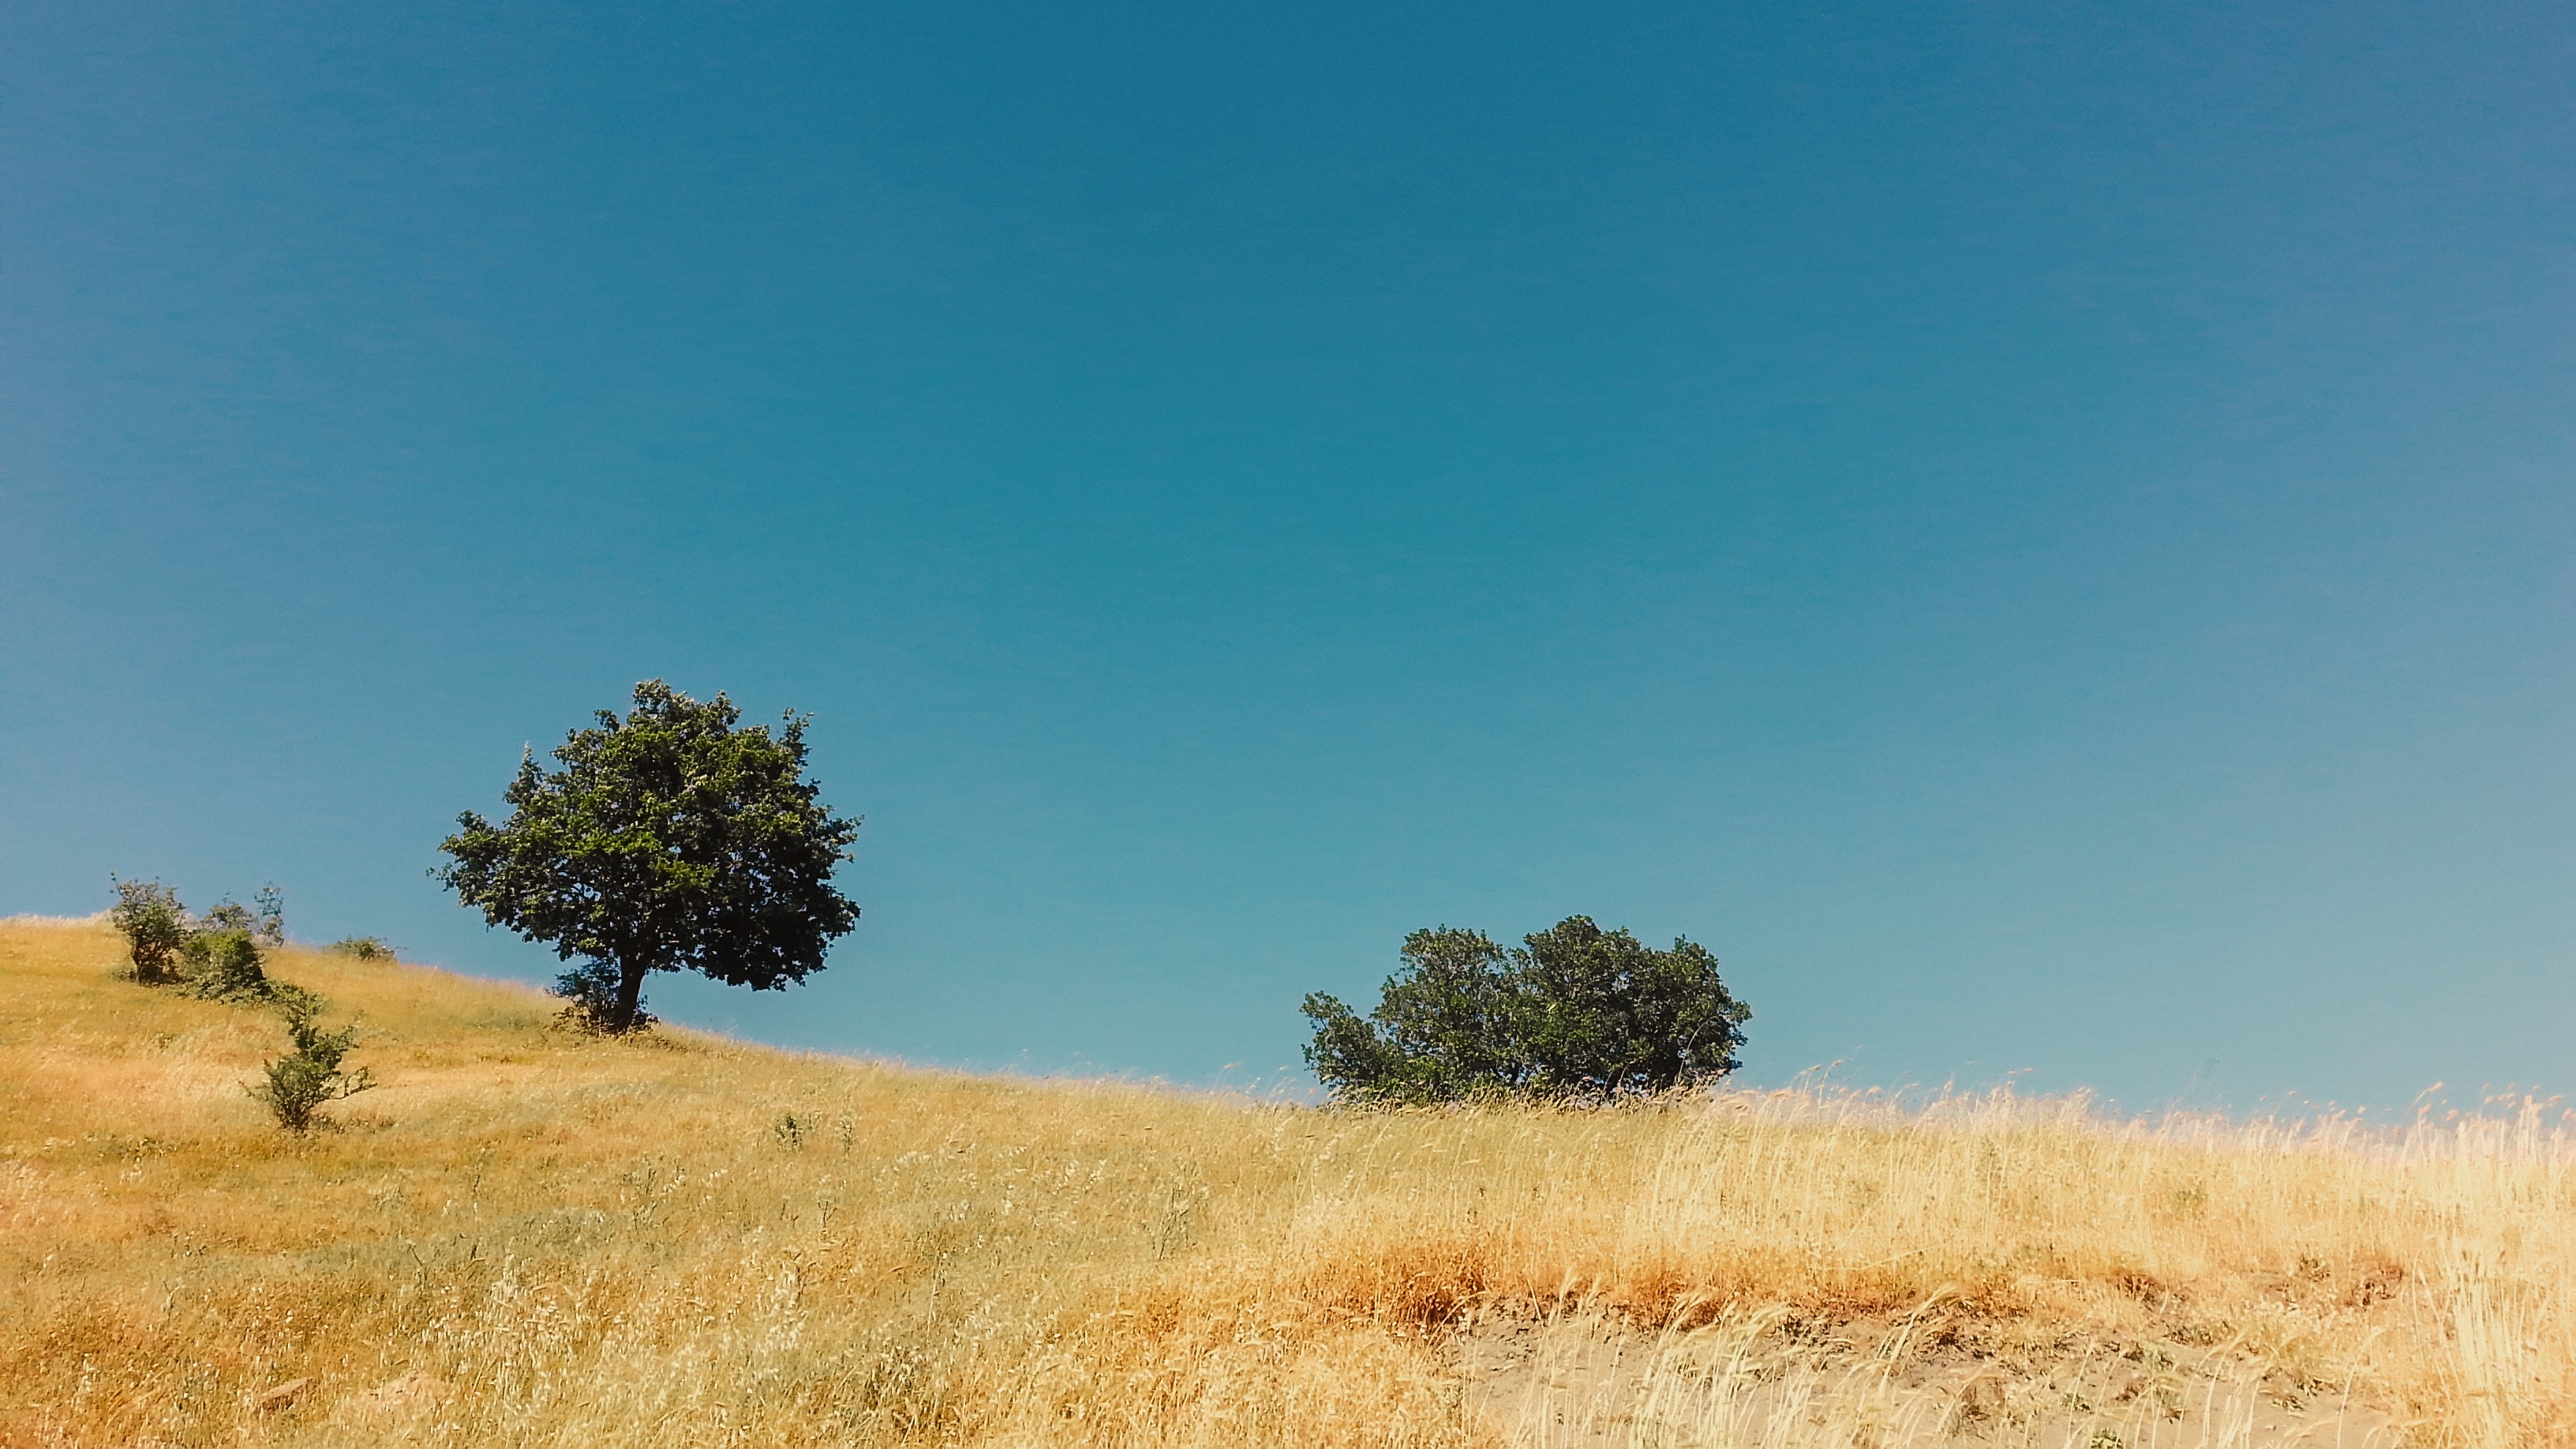 General 3264x1836 field trees landscape dry grass summer clear sky plains hills hay sky outdoors plants